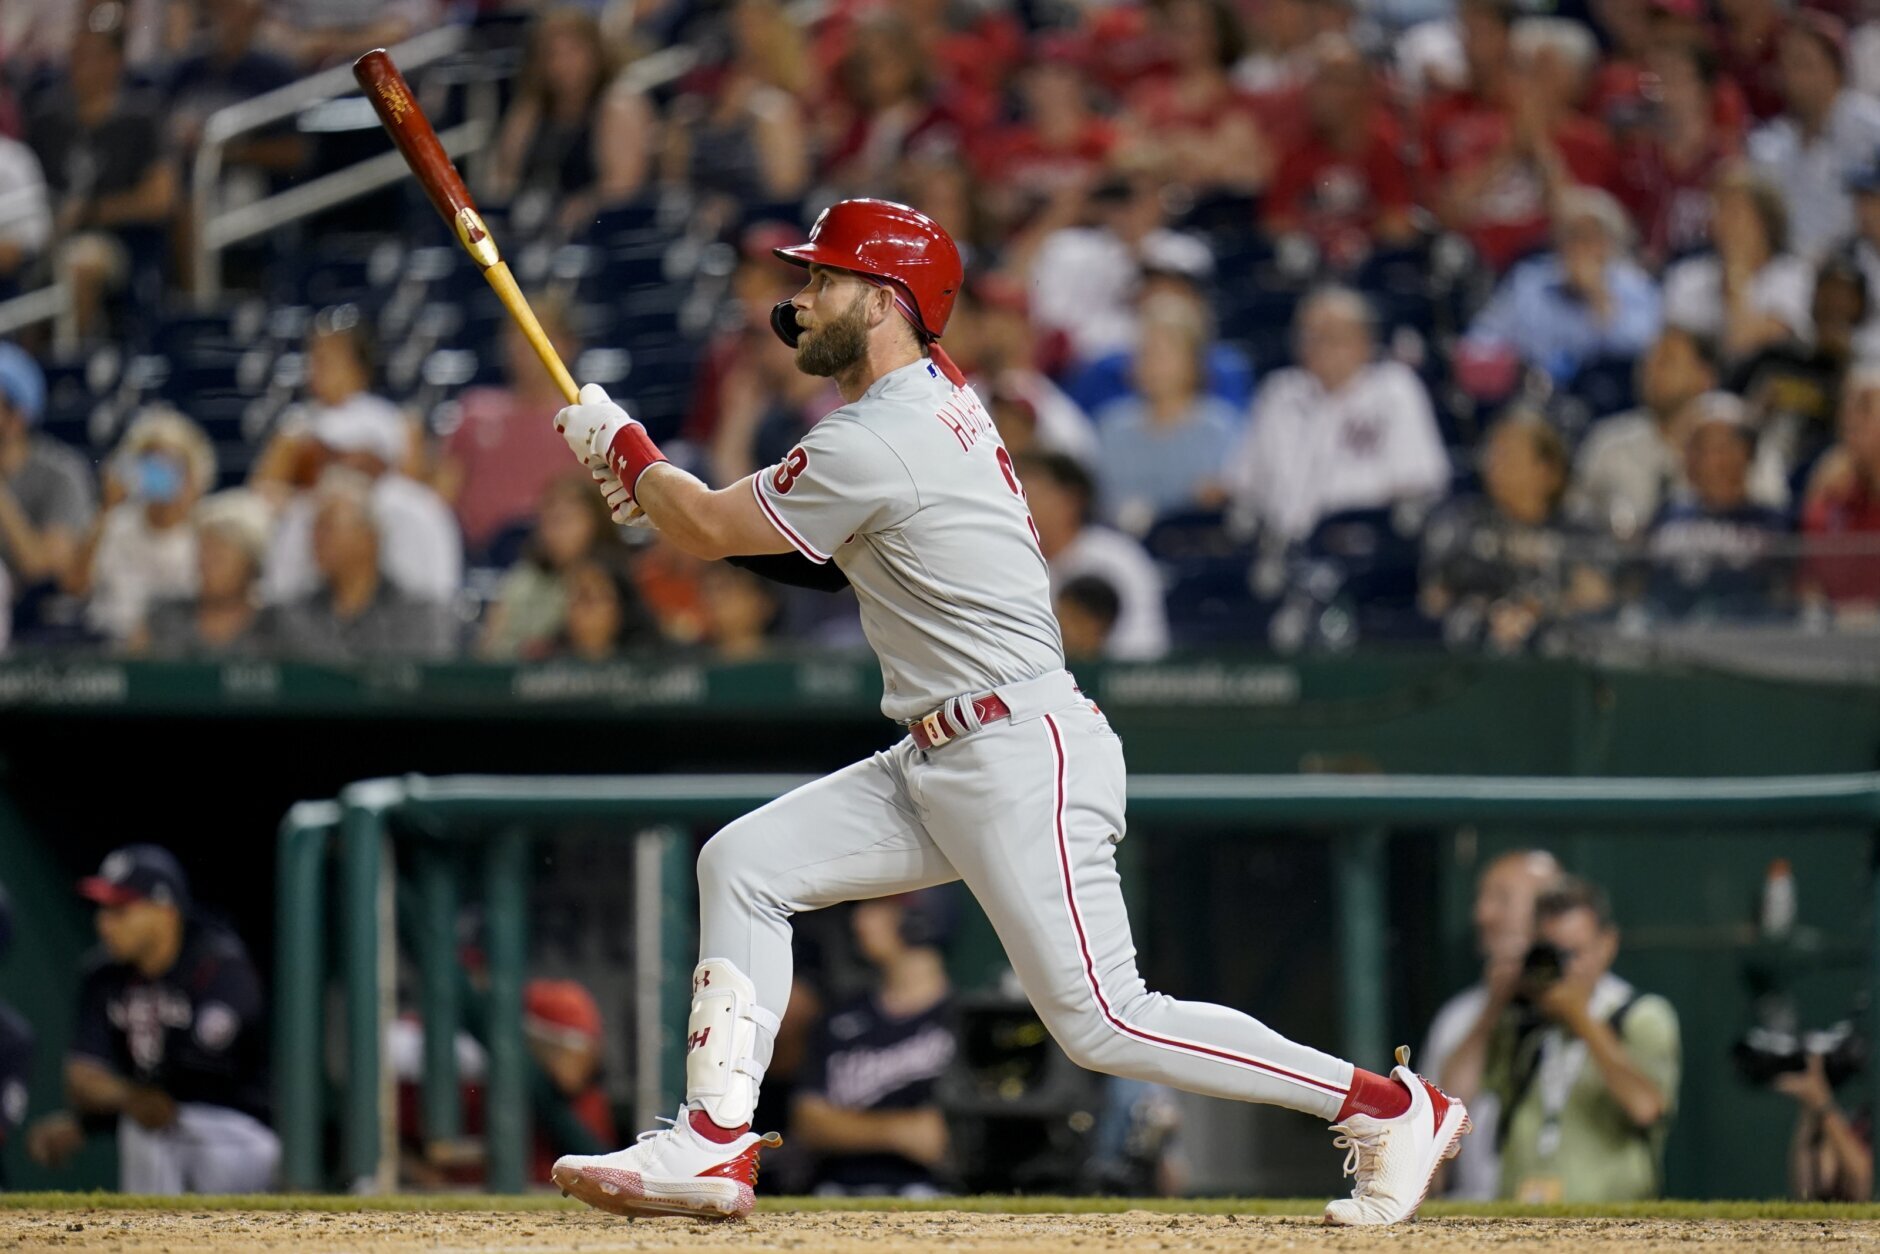 Obstruction call helps Phils sweep Nats for 14th win in 16